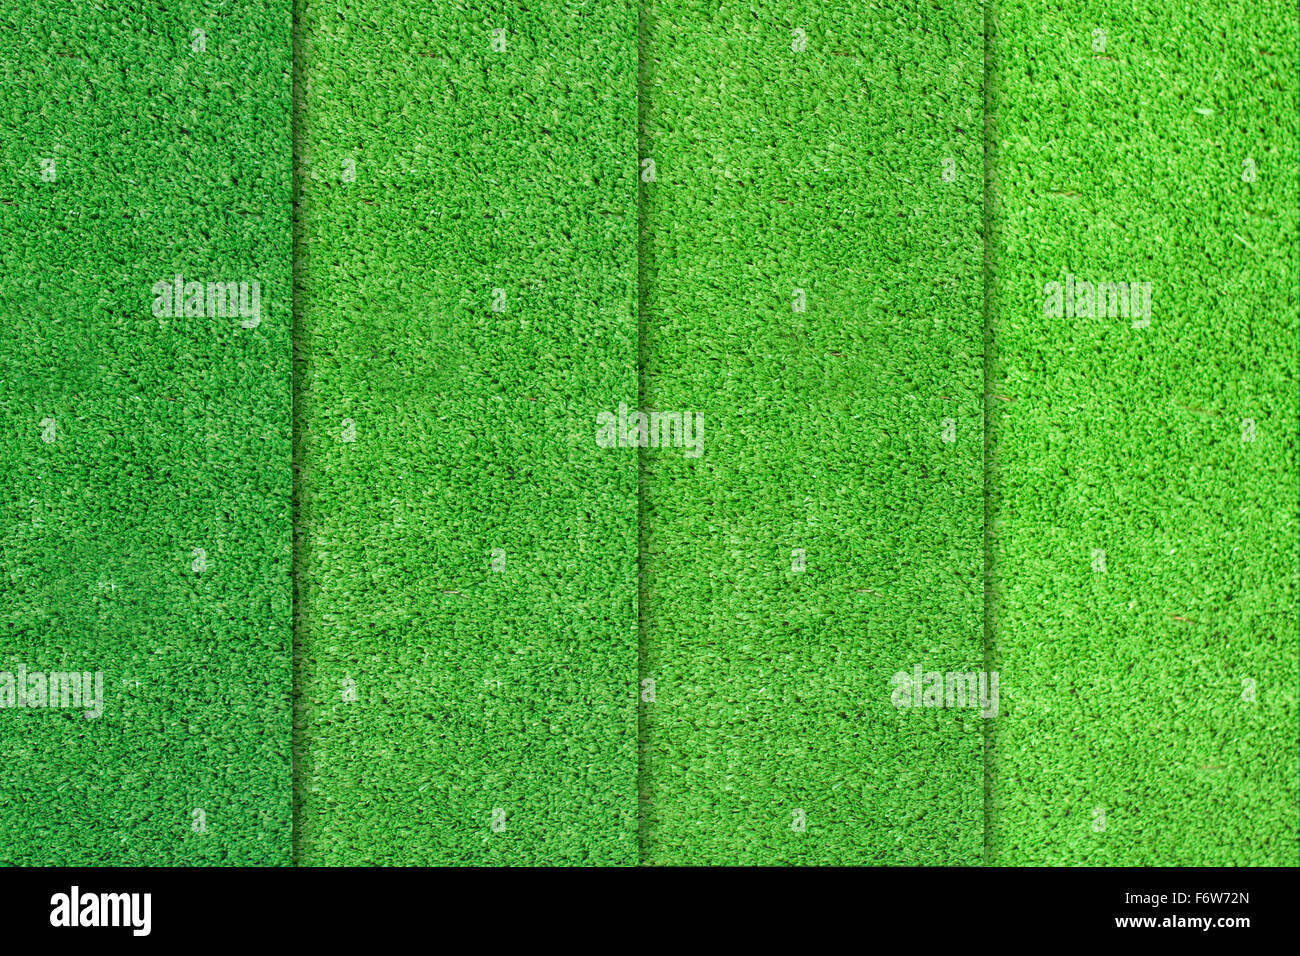 Green grass color differences Stock Photo